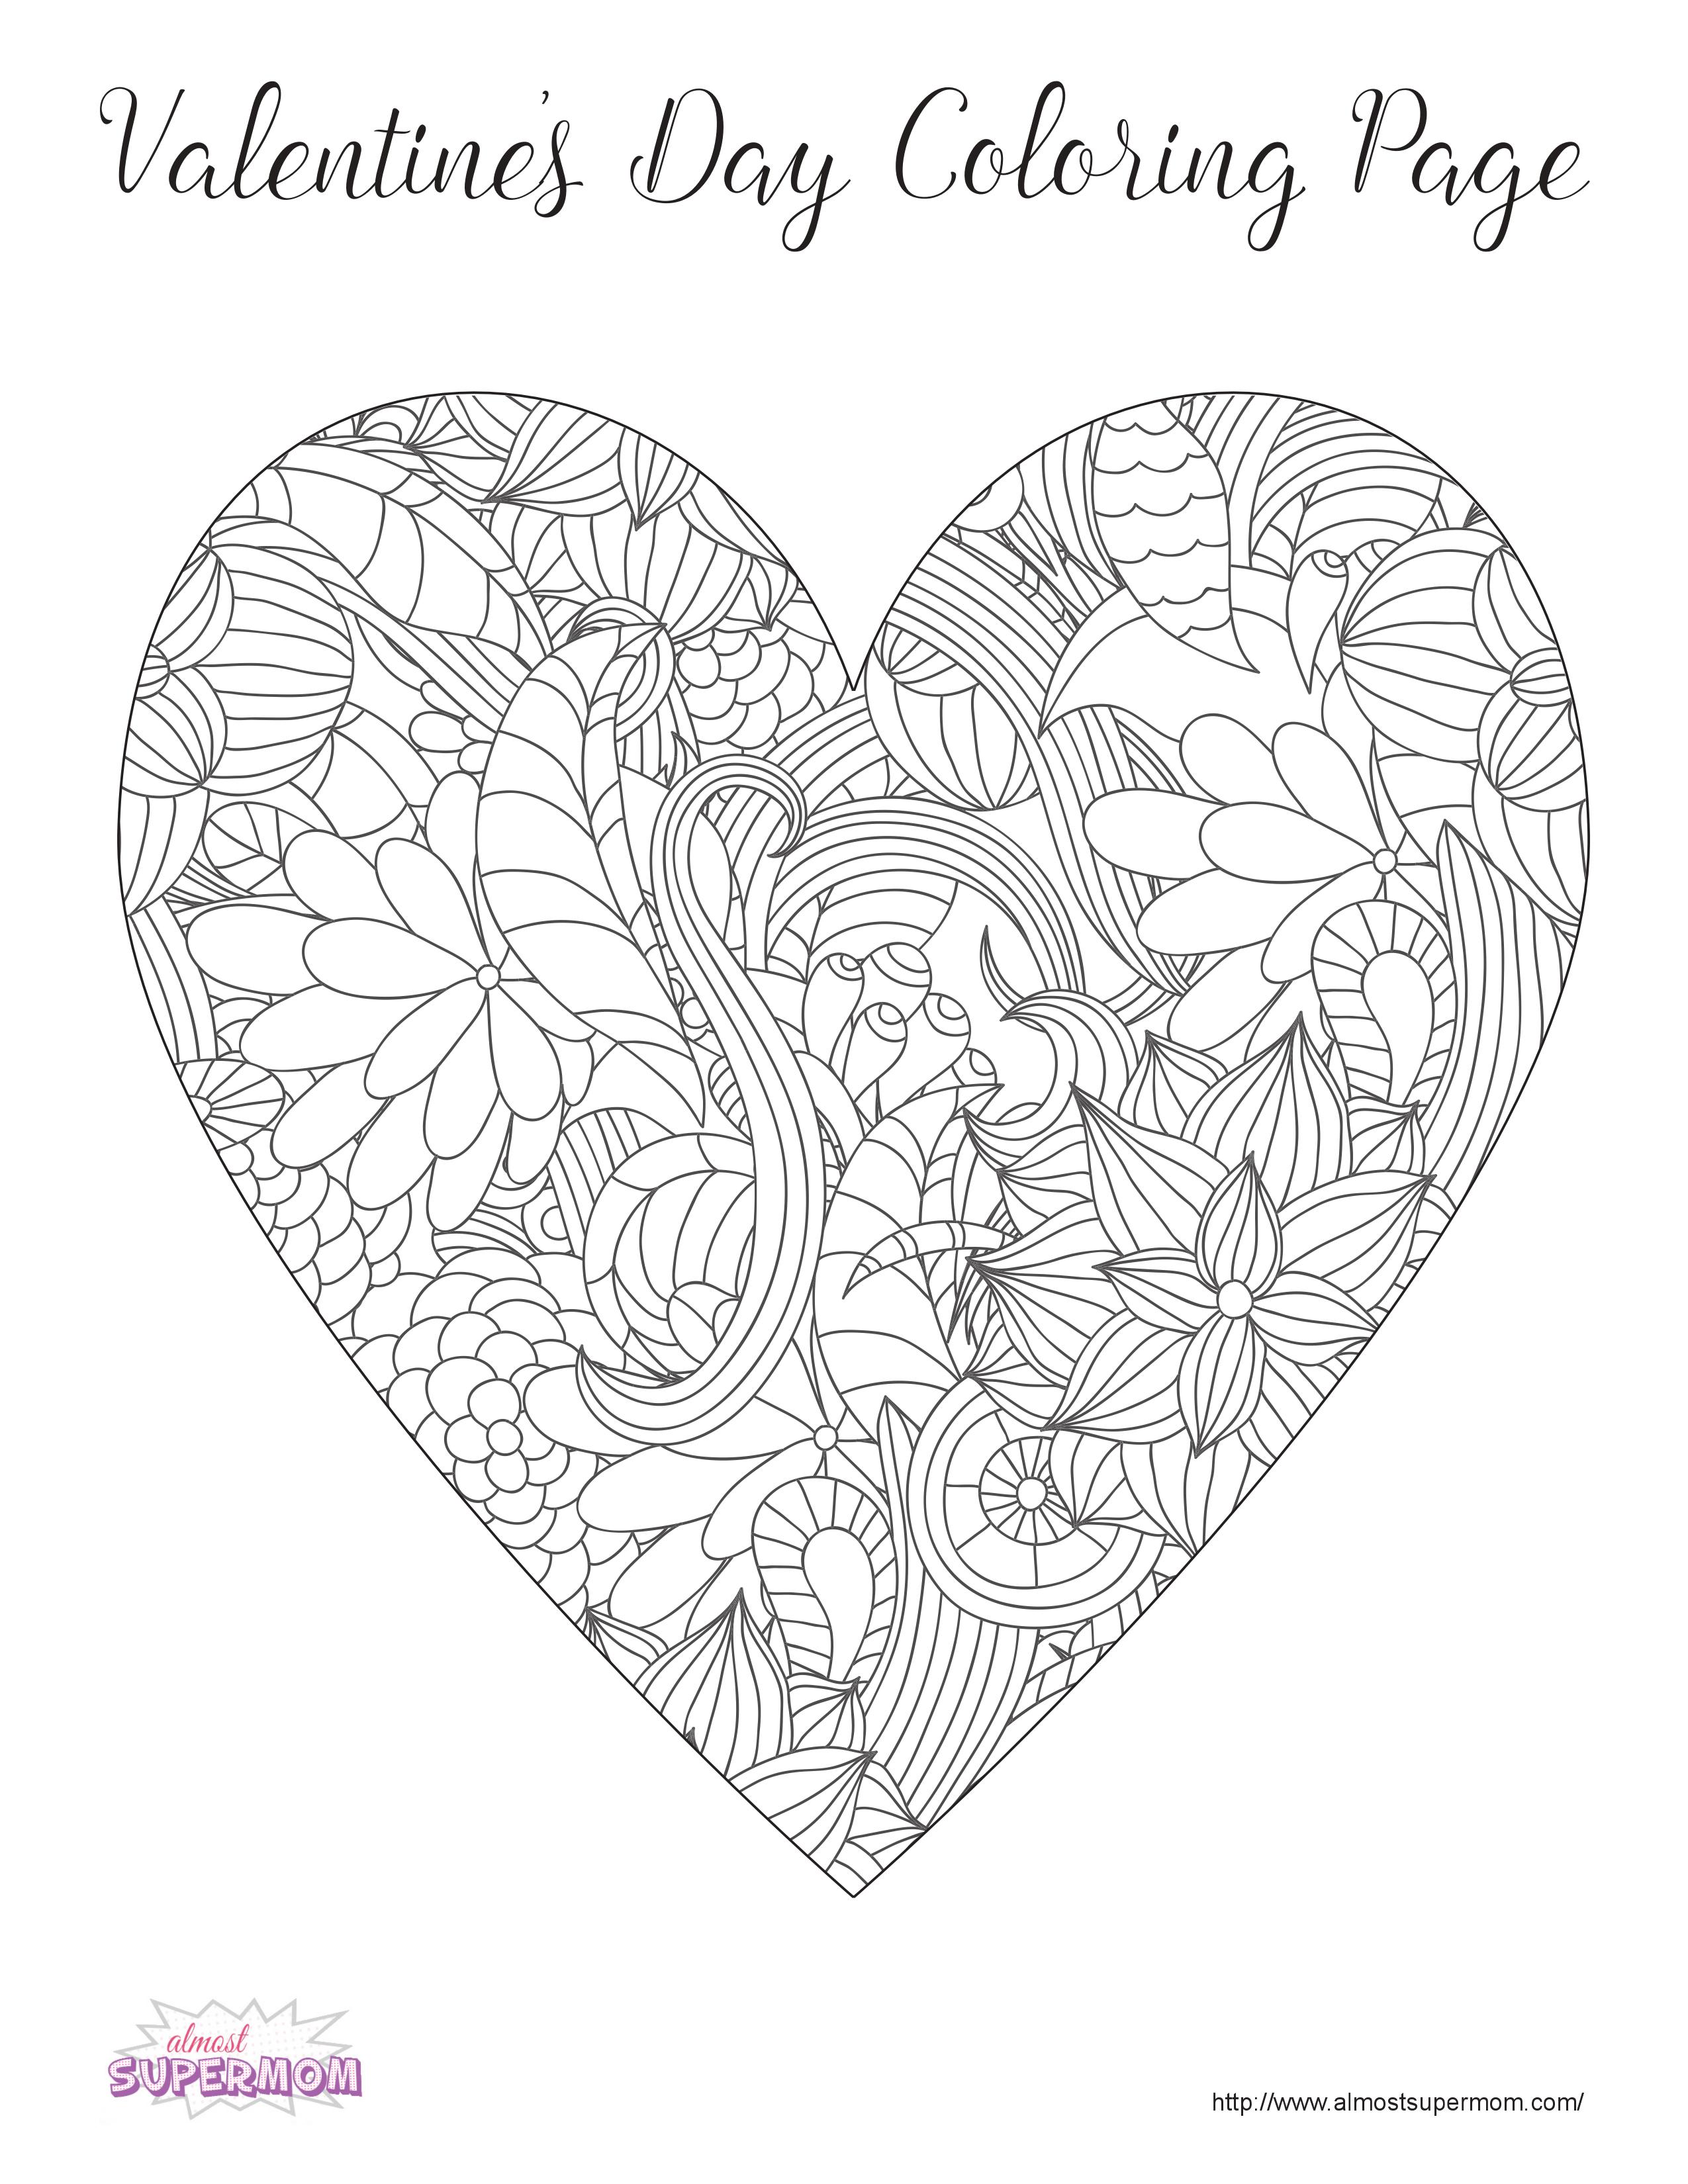 View Valentines Day Coloring Pages Adults Pictures - Animal Coloring Pages